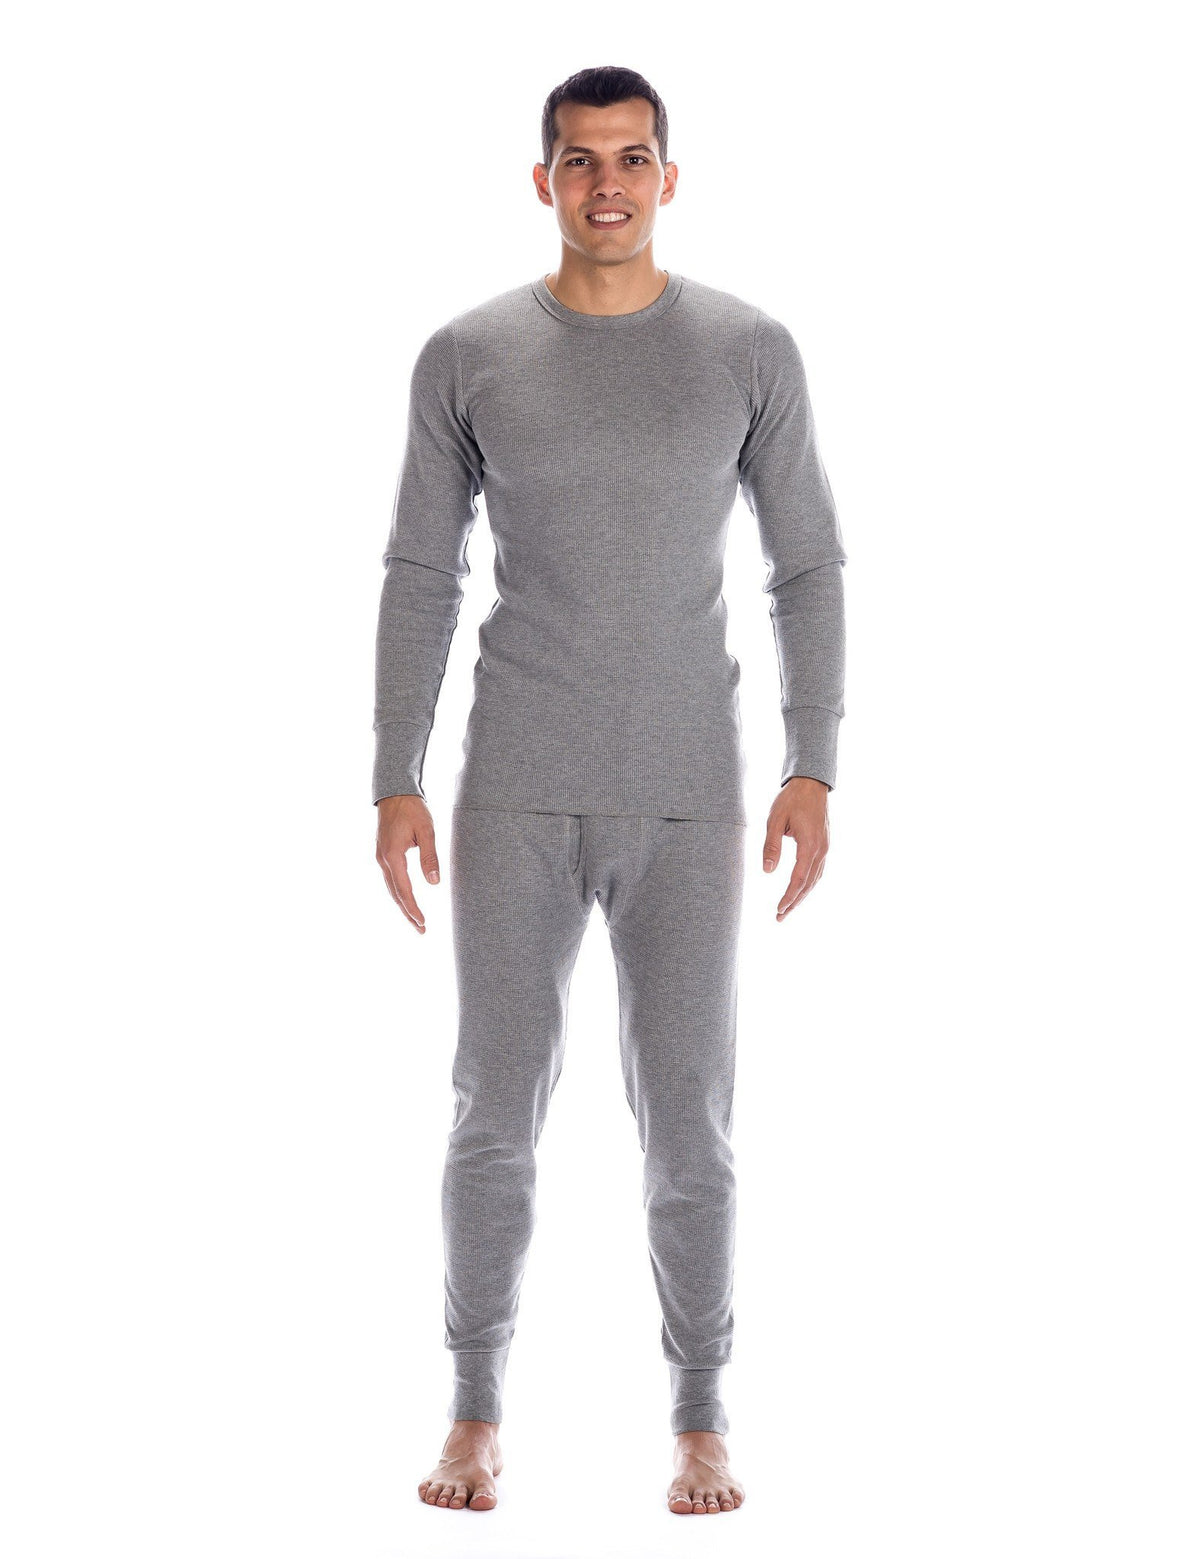 Men's Classic Waffle Knit Thermal Top and Bottom Set - Heather Gray